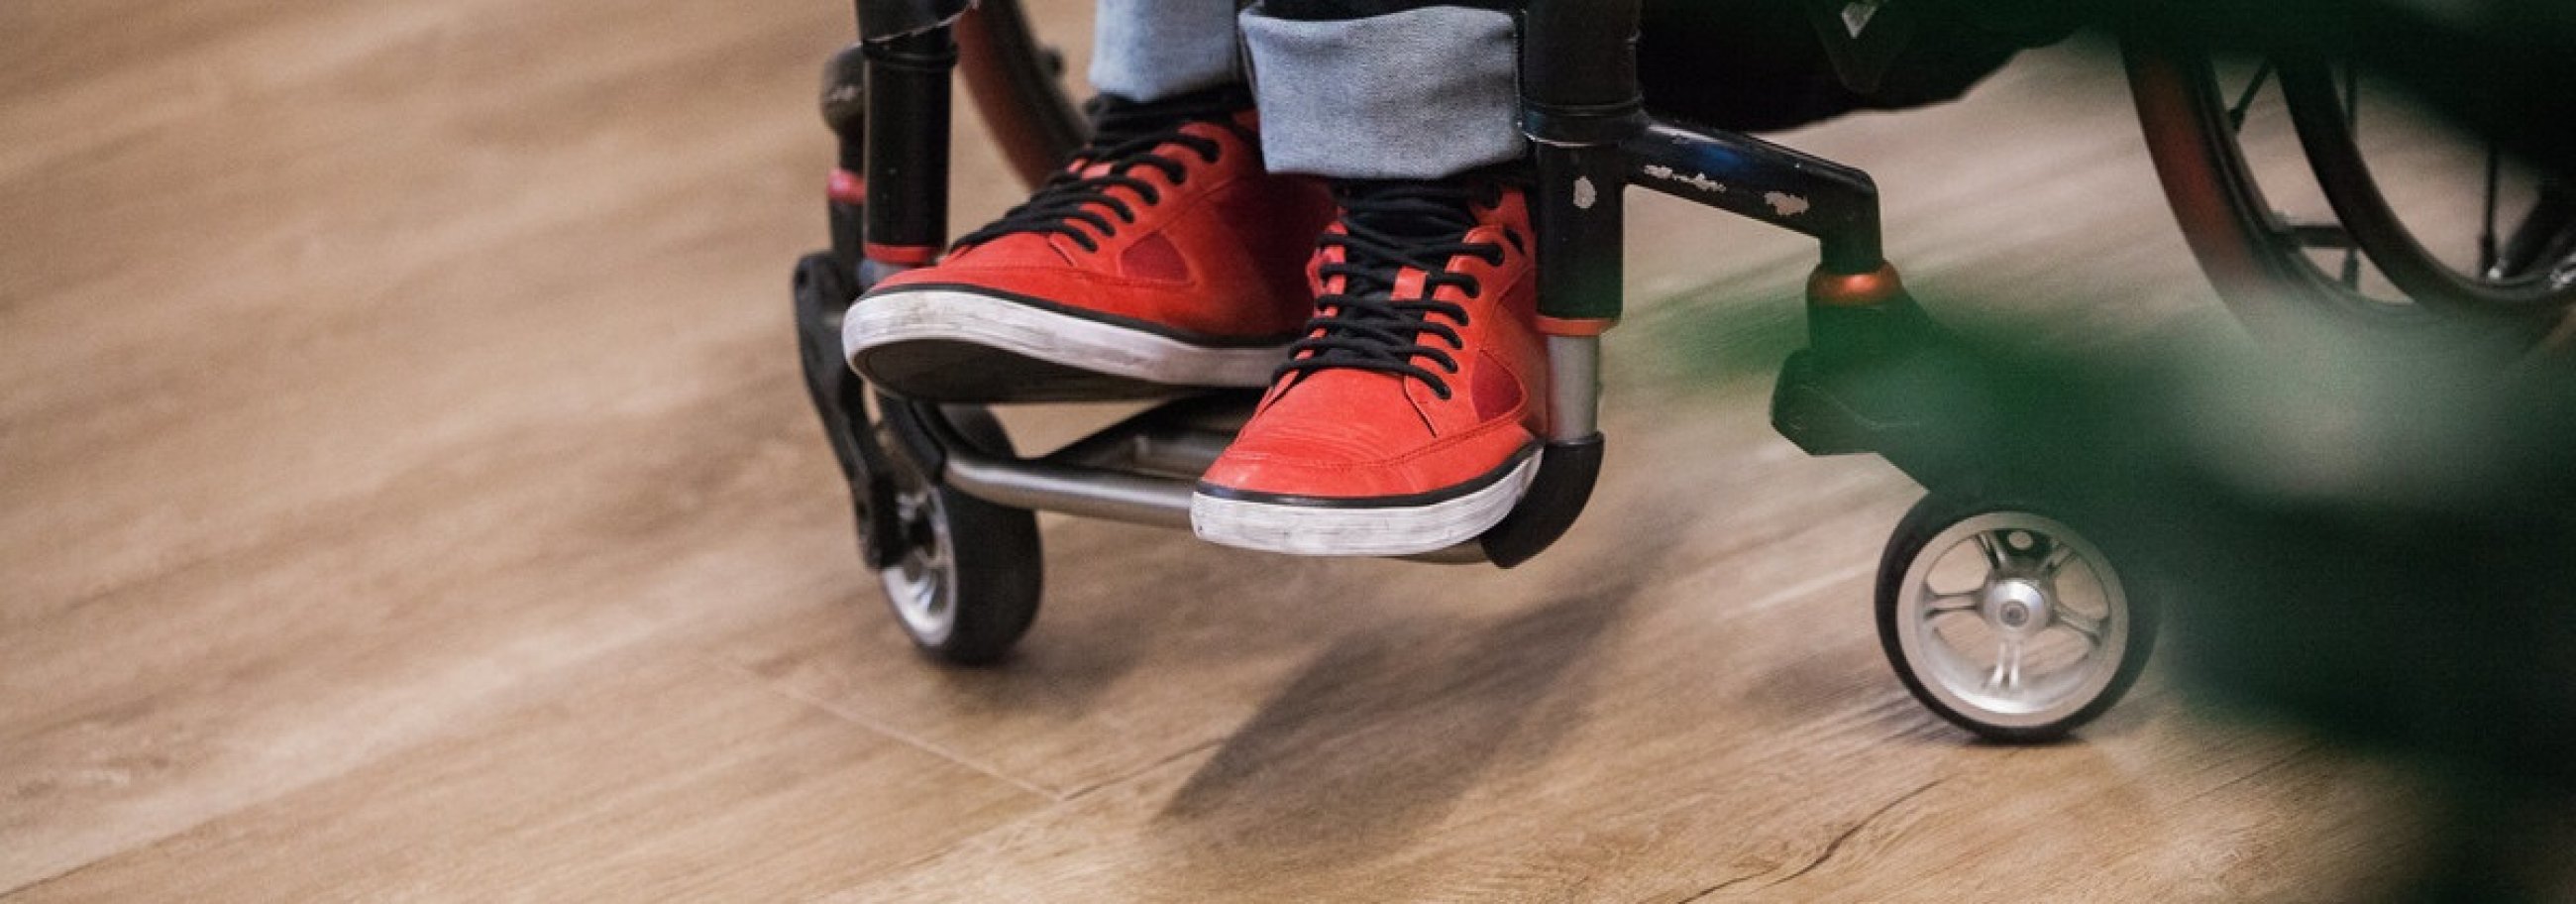 wheelchair wheels and red sneakers